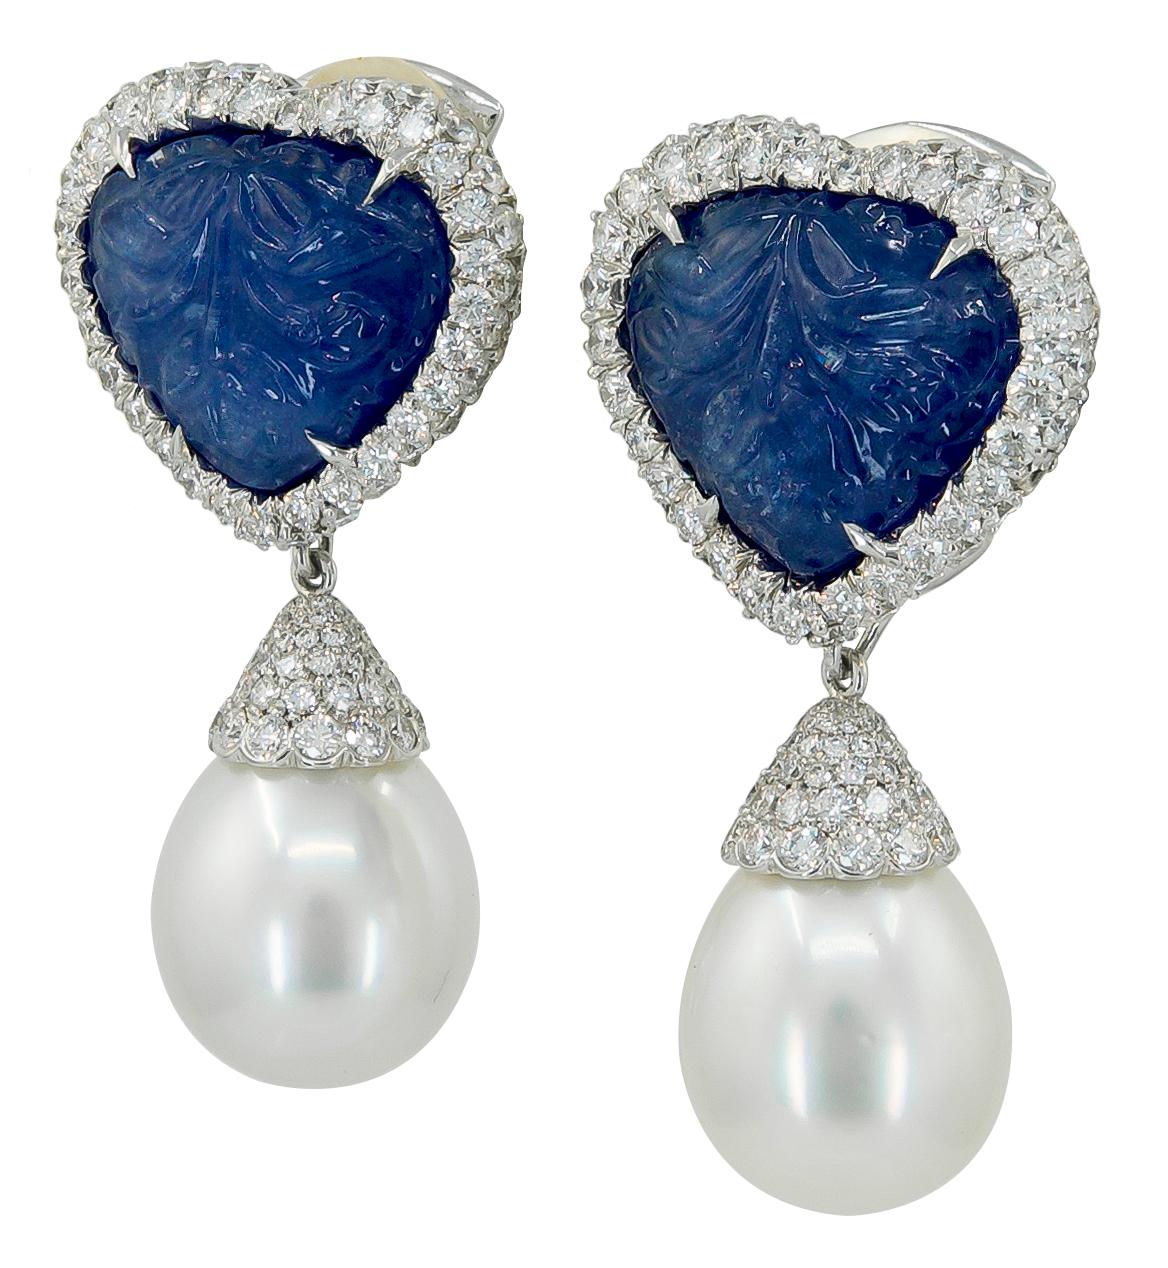 A pair of 18k white gold earrings, set with diamonds, two south sea pearls, and heart-shaped carved sapphire detachable ear clips, signed Haume.
Total Sapphire carat weight is approx. 60 cts. and diamonds are 8.13 cts. and each pearl is approx. 15mm